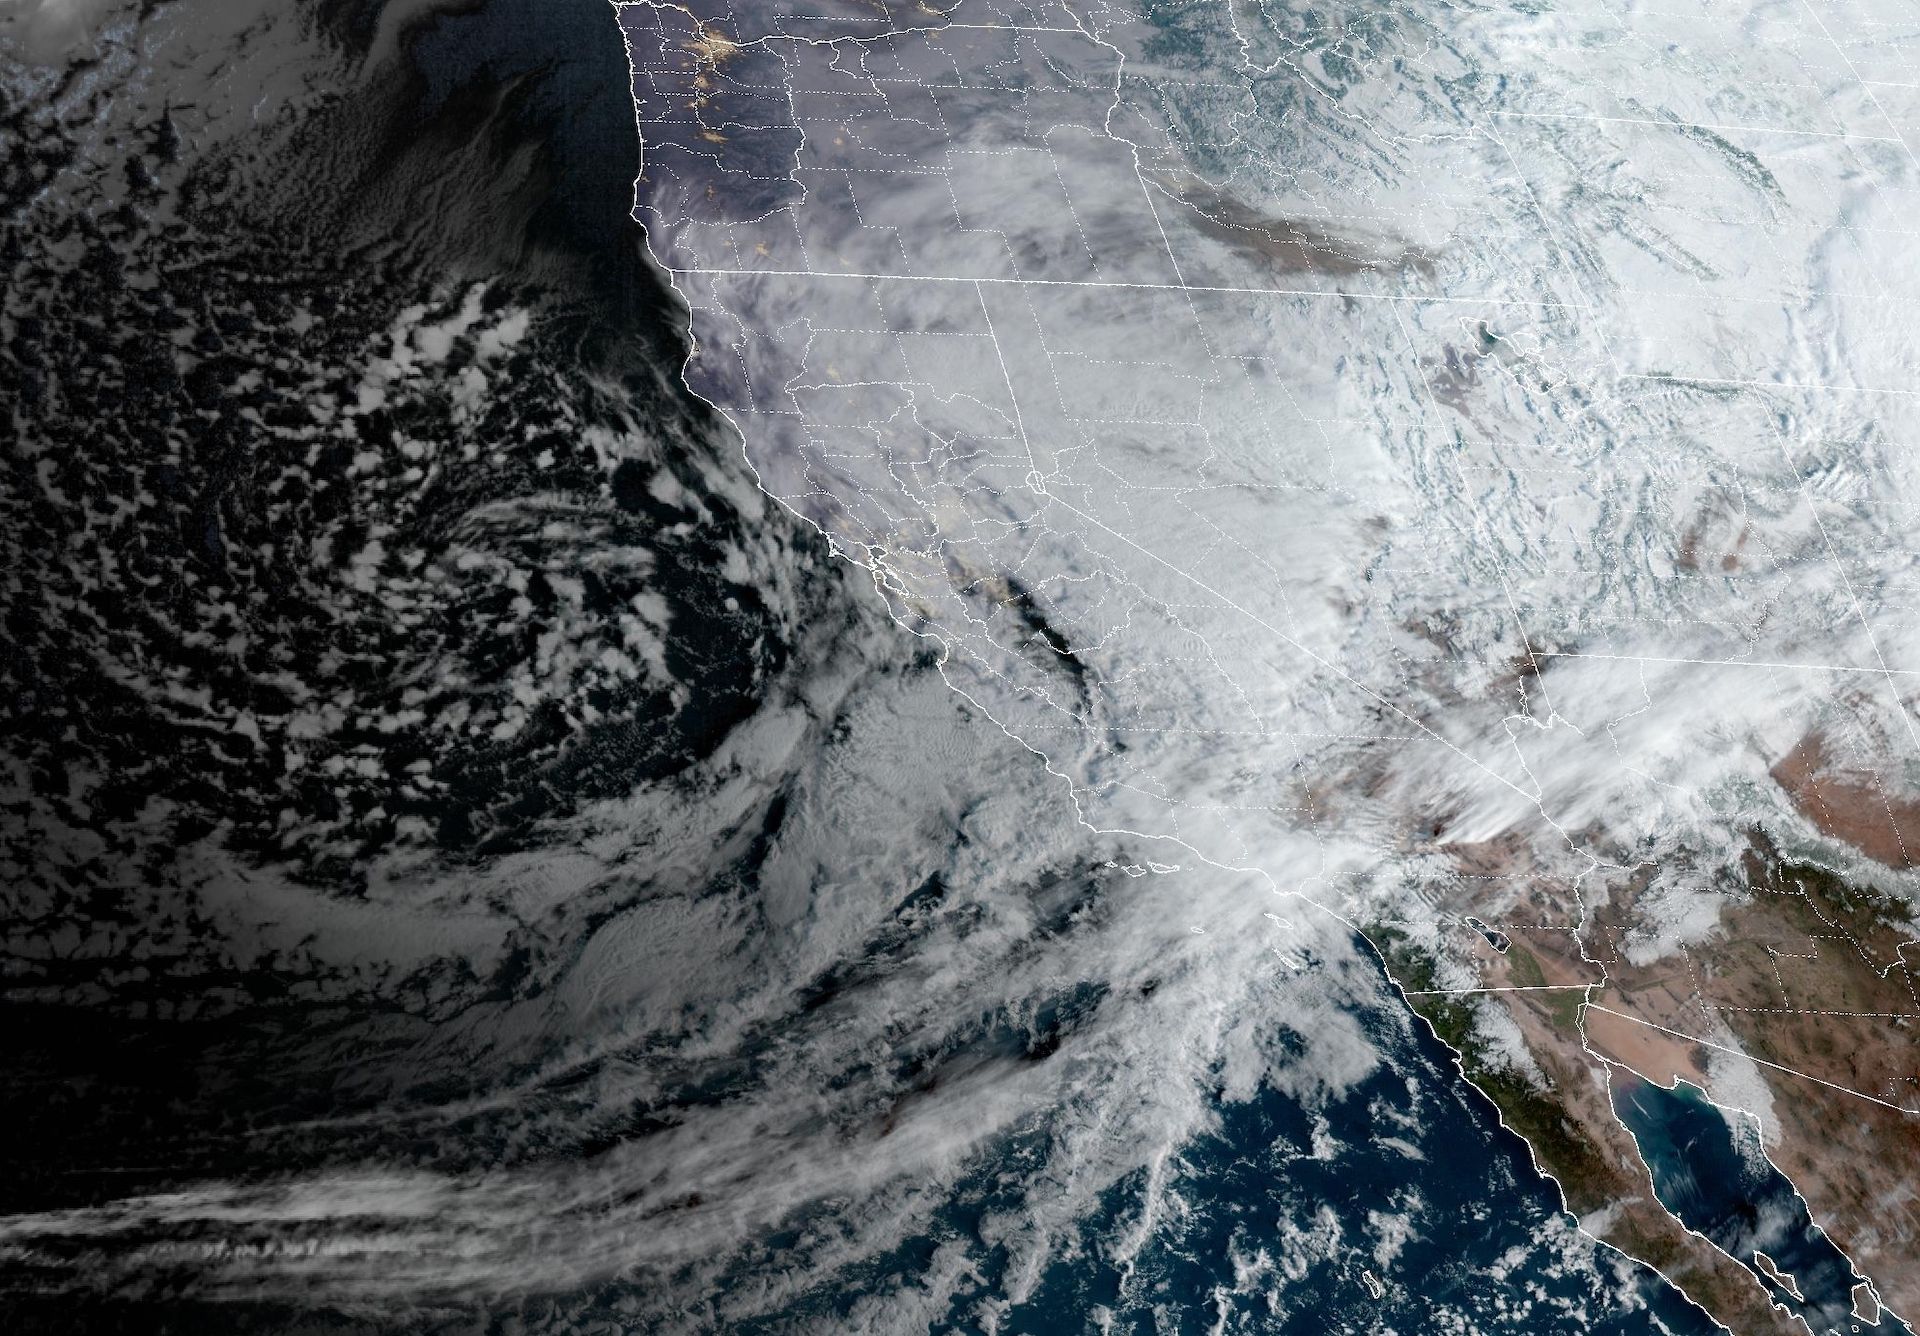 Satellite view showing the swirling storm off the California coast, pushing moisture inland.